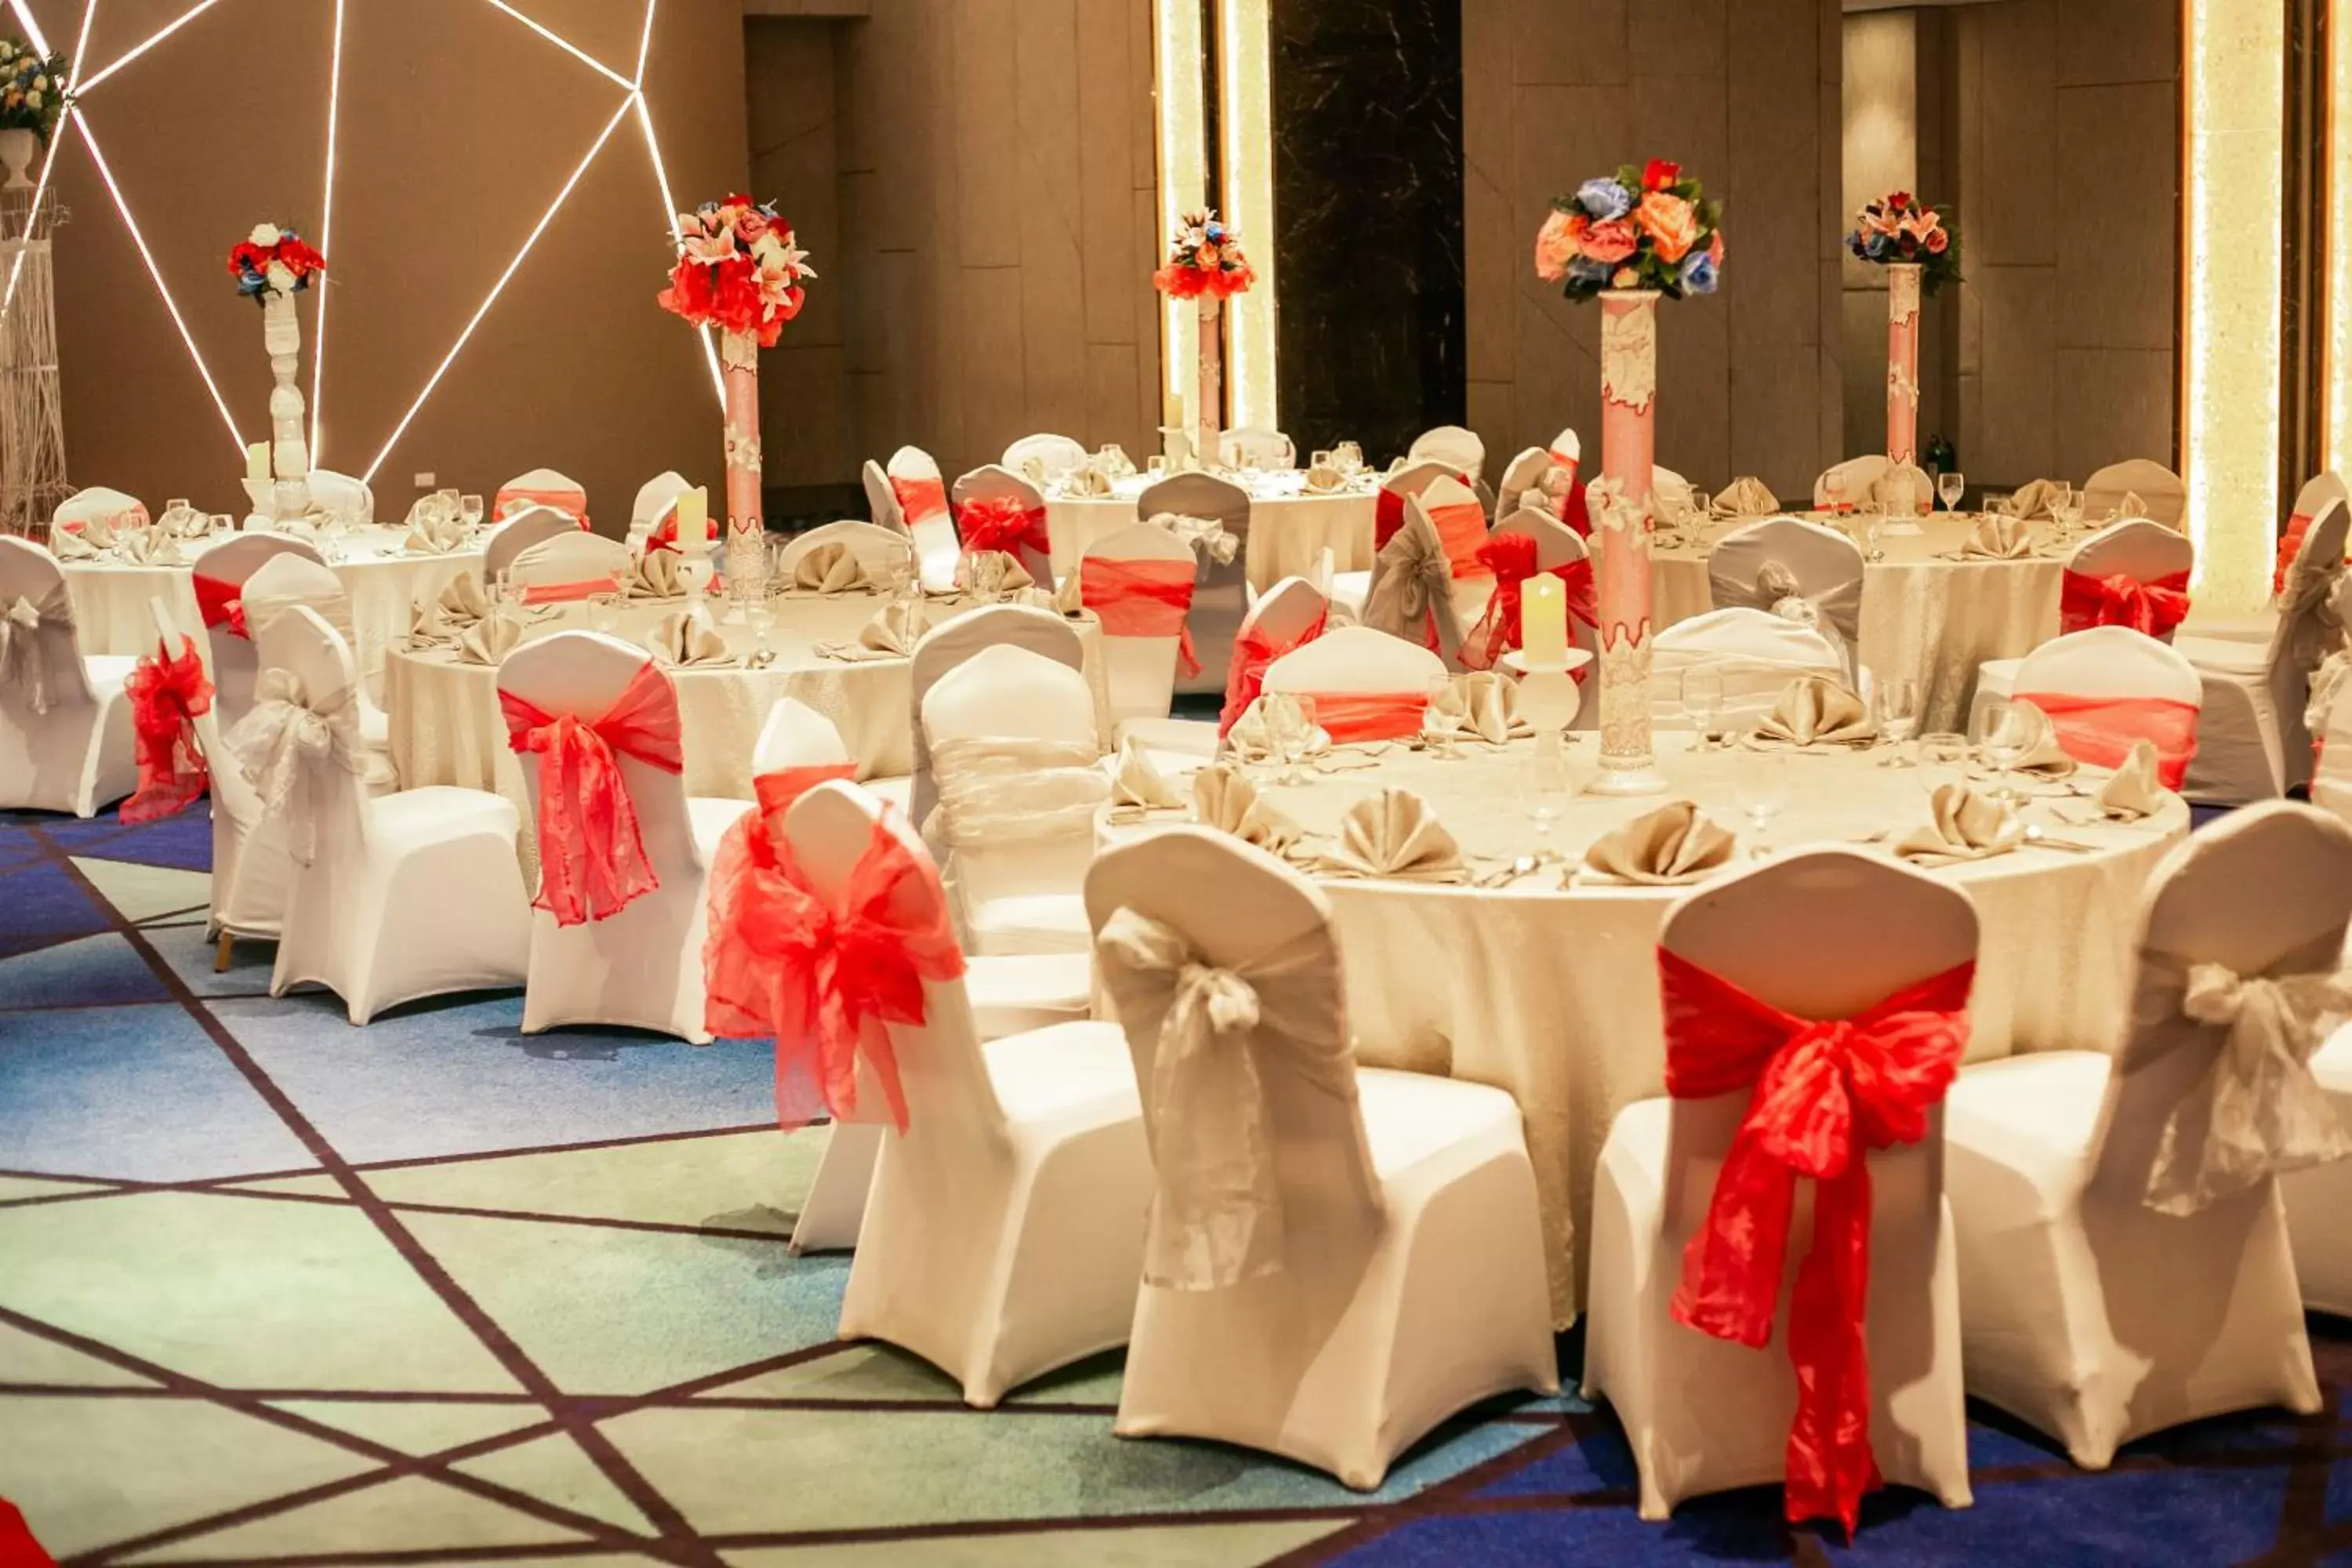 Banquet/Function facilities, Banquet Facilities in Luxent Hotel